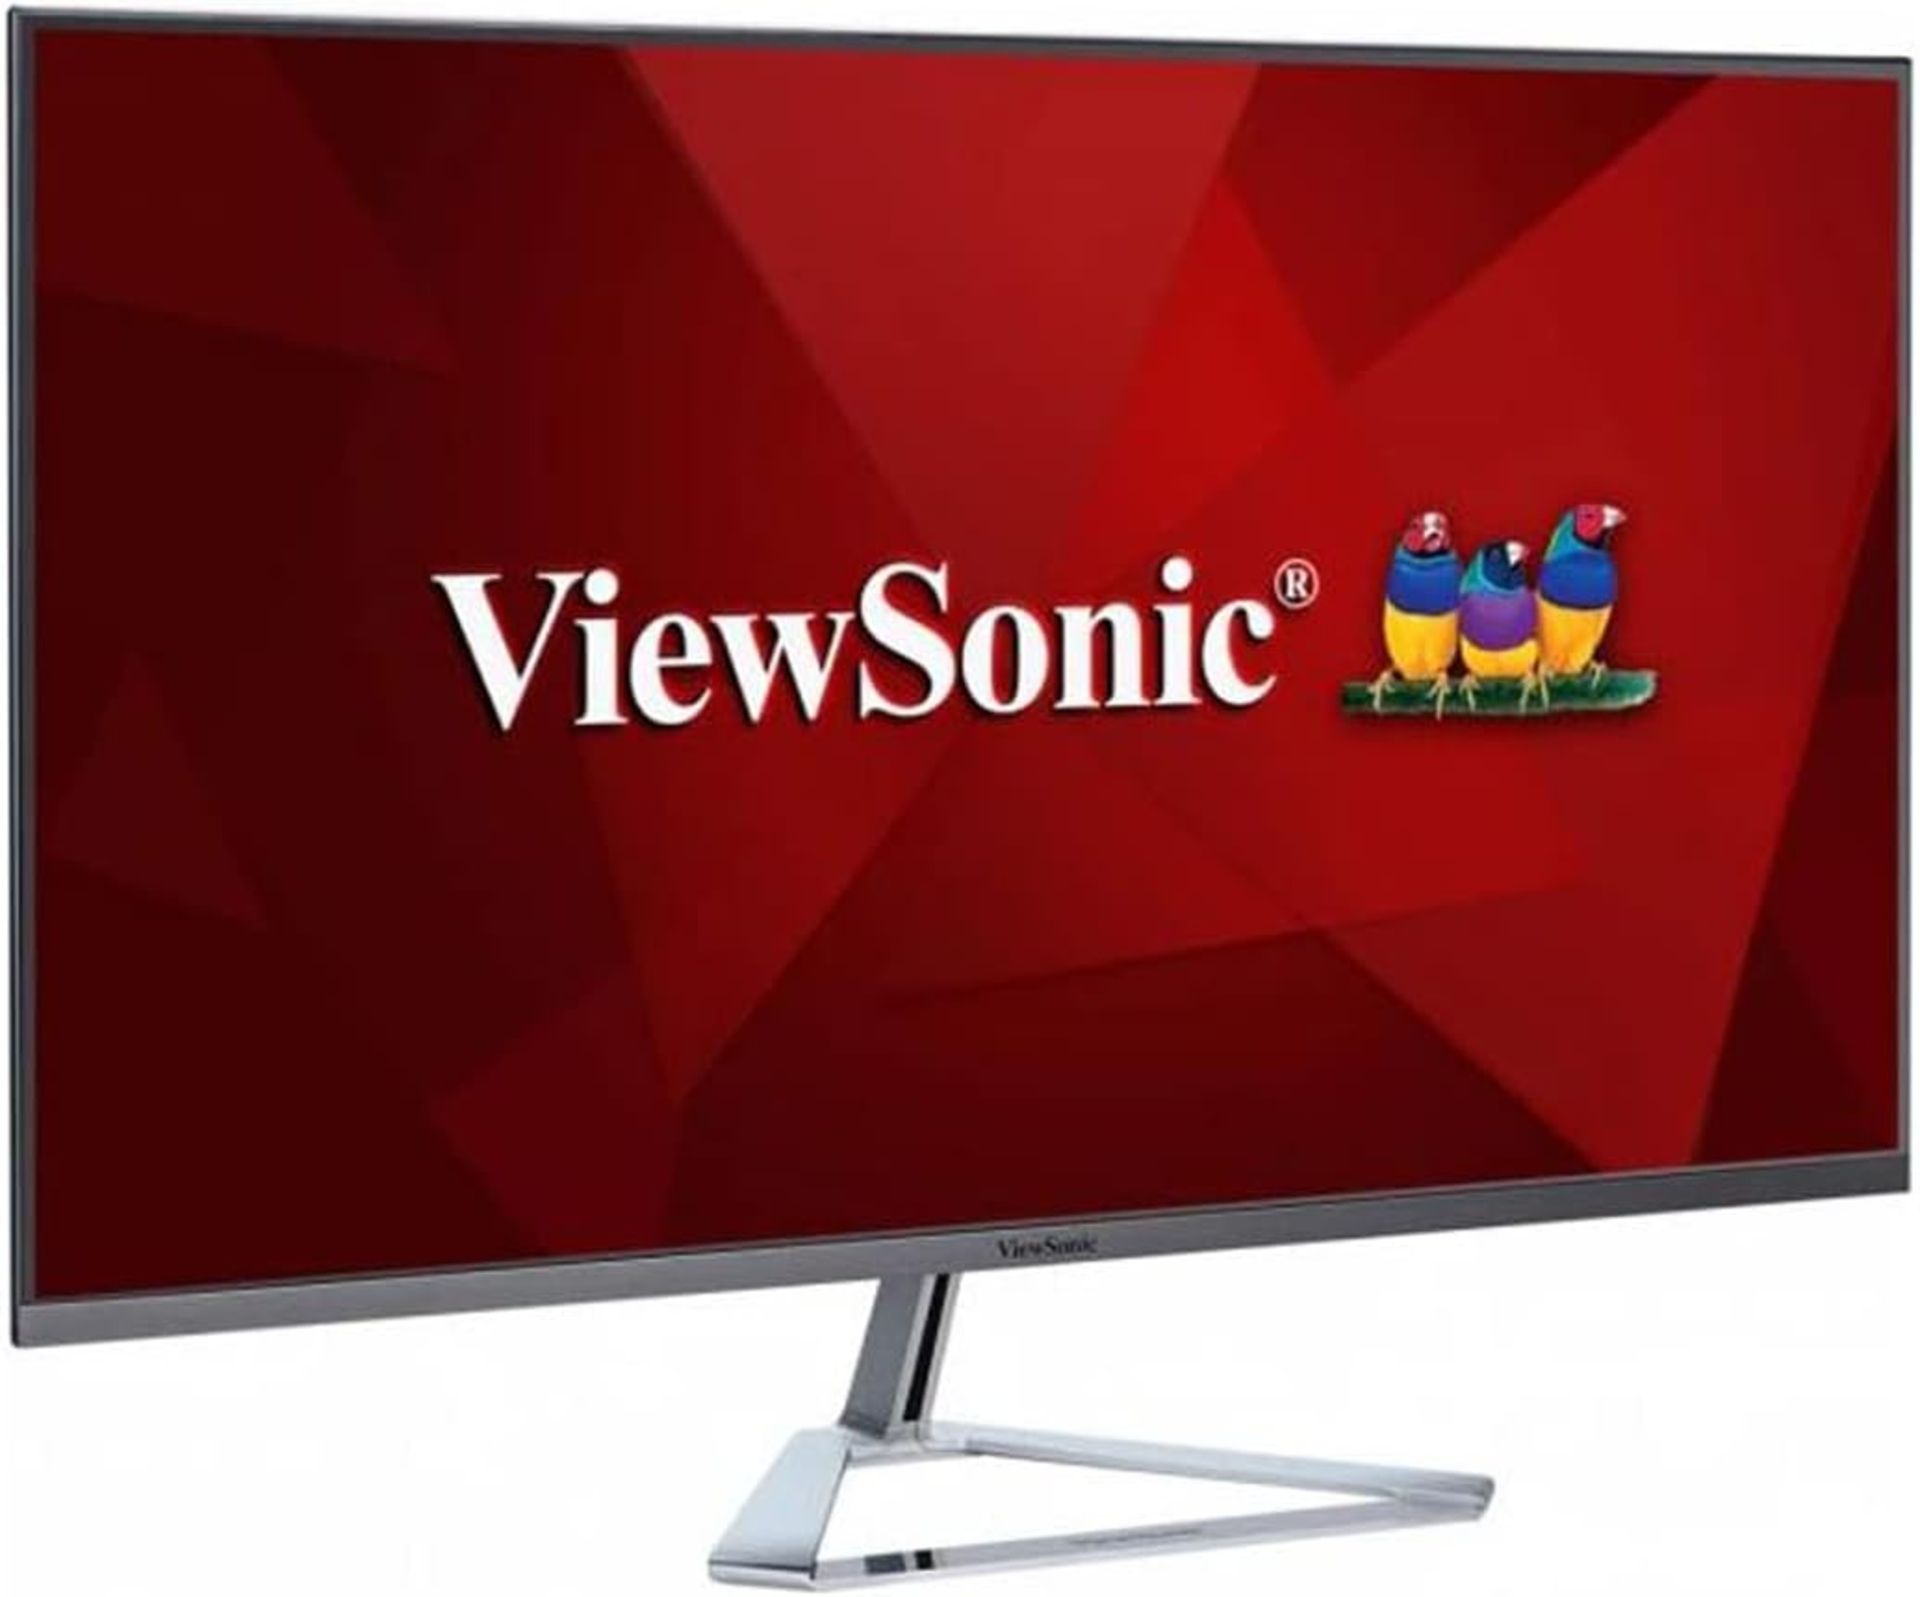 ViewSonic VX3276-MHD-3 32-inch IPS 1080p HD Monitor, with HDMI, DisplayPort, VGA, for Work and